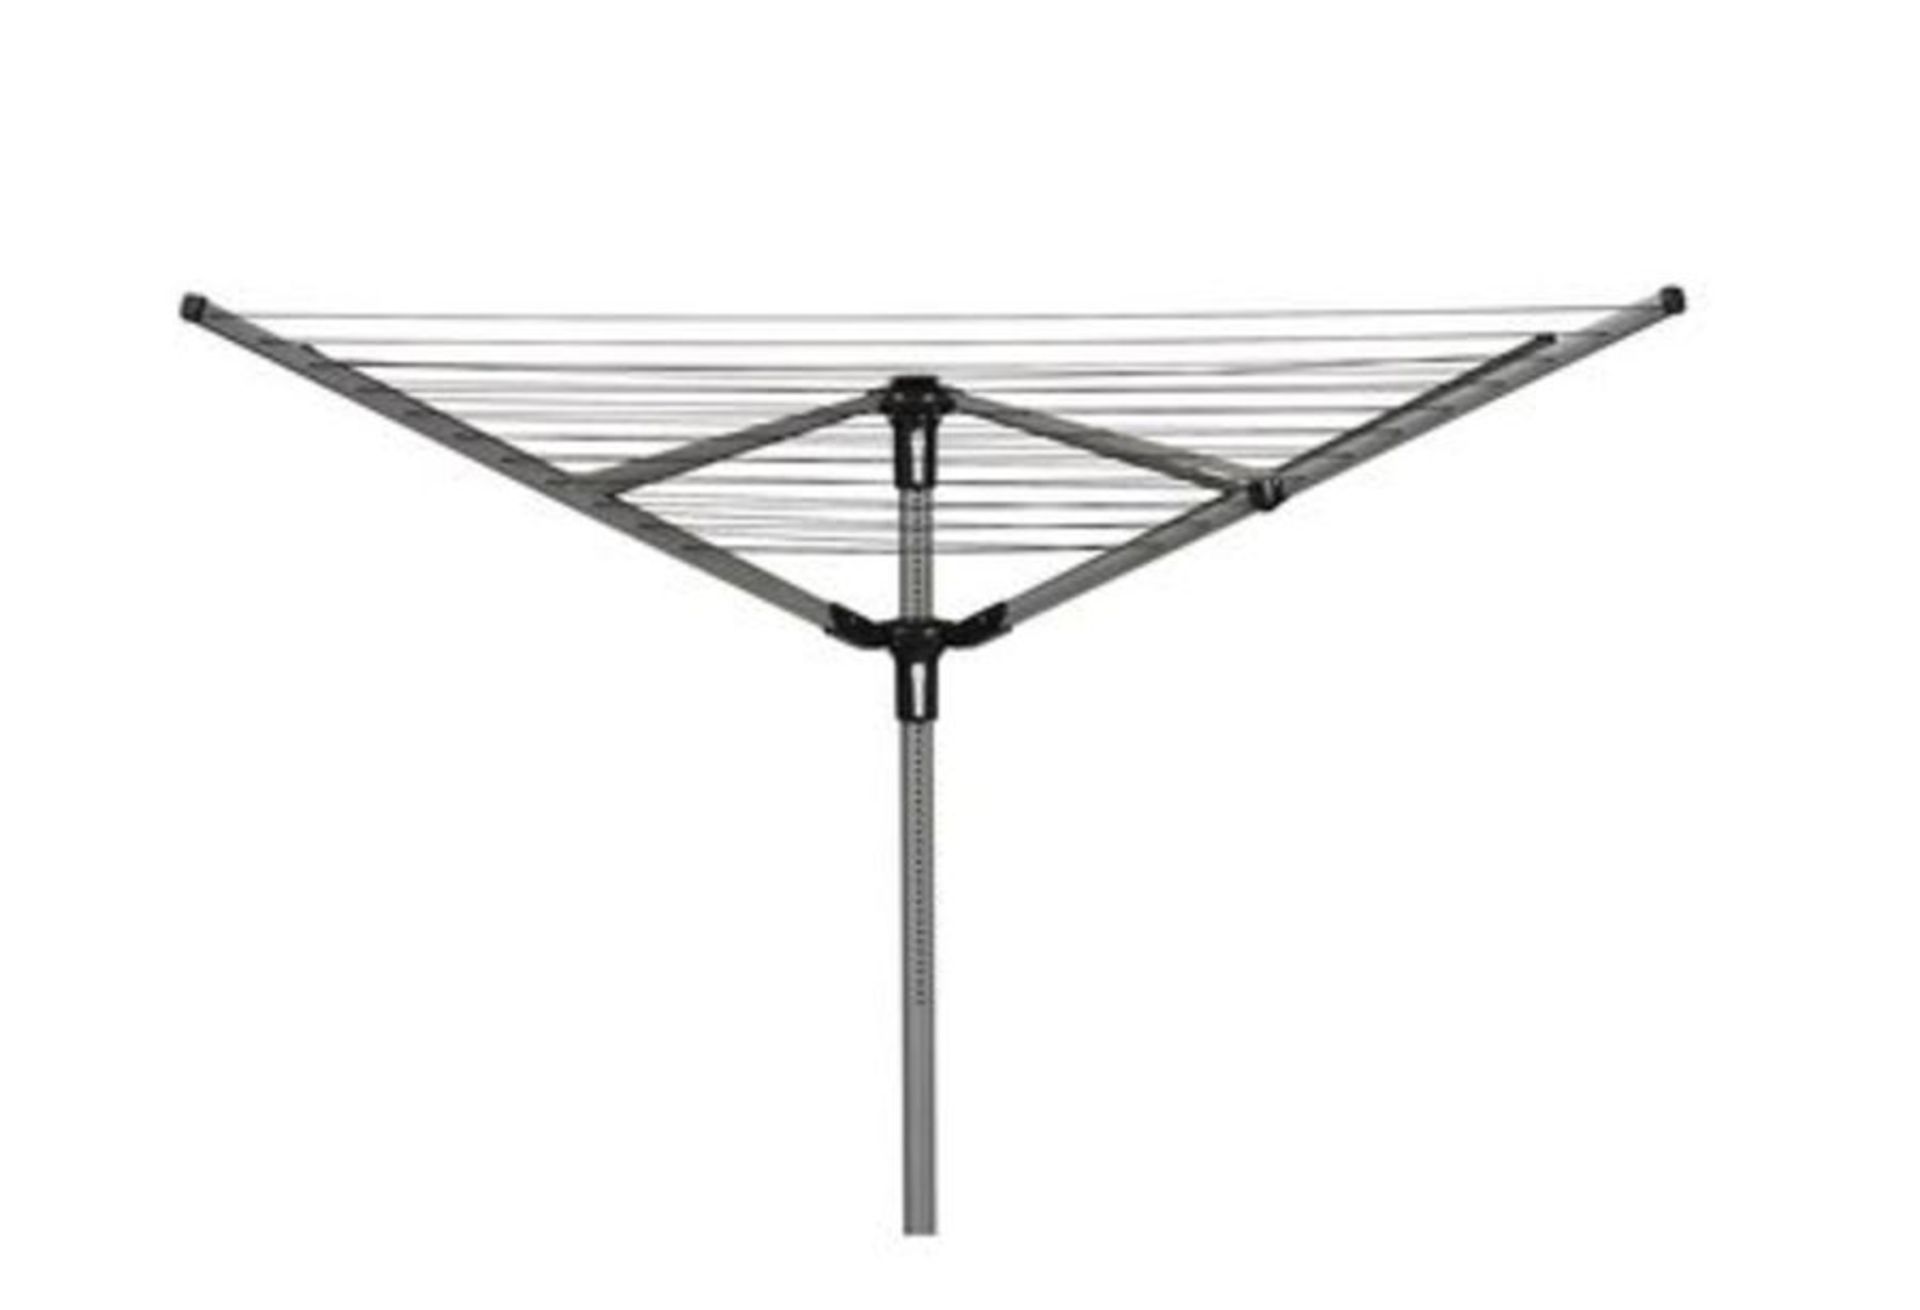 1 X 4-ARM BLACK SILVER EFFECT ROTARY AIRER, 60M / RRP £50.00 / UNTESTED CUSTOMER RETURN, PICTURE FOR